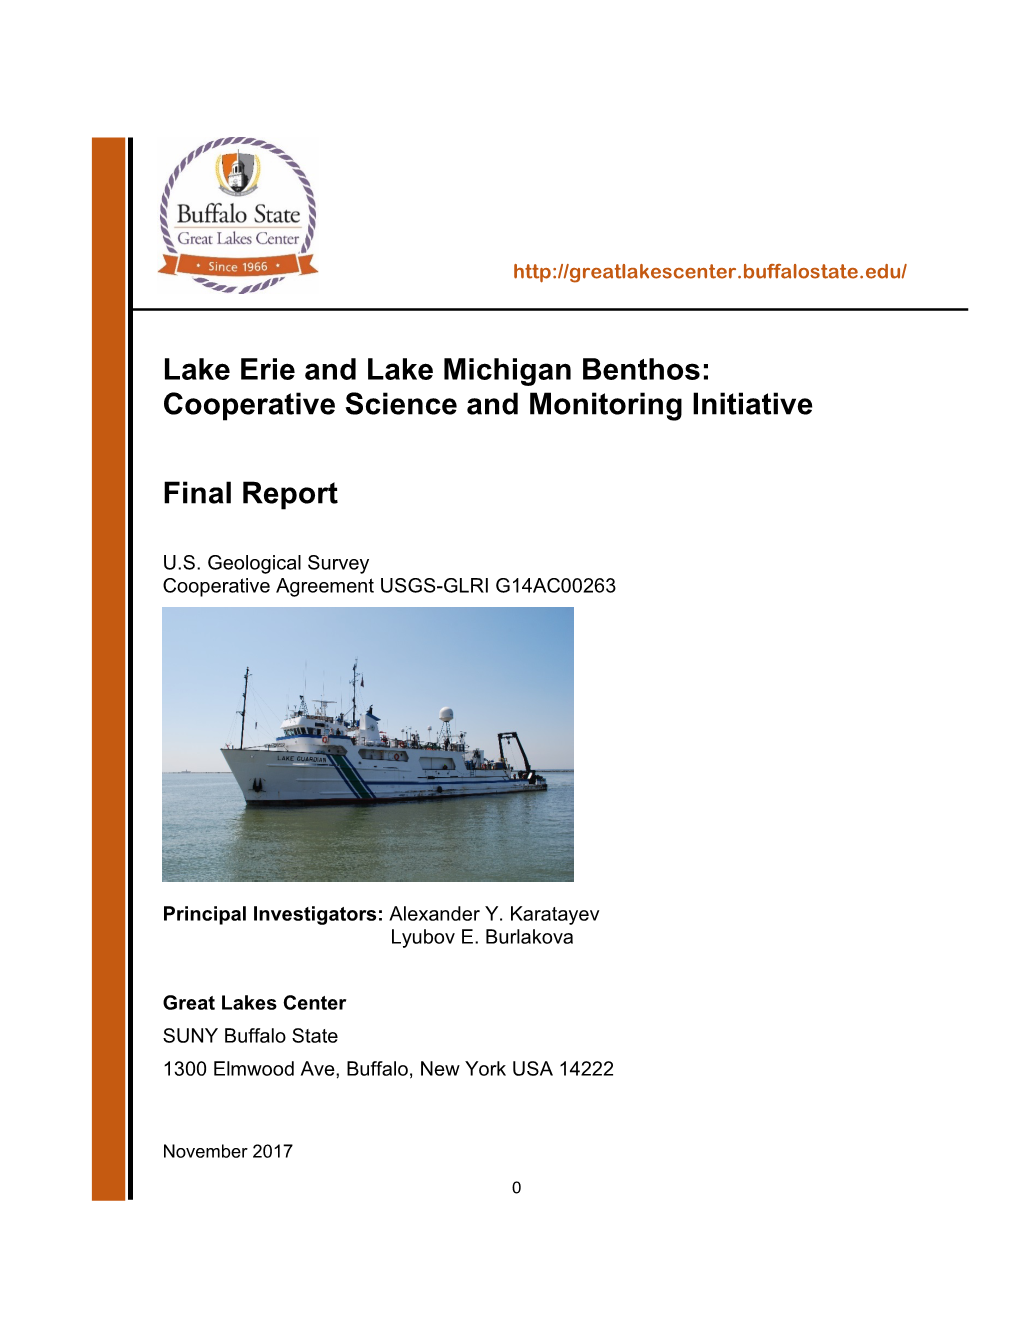 Lake Erie and Michigan Benthos: Cooperative Science and Monitoring Initiative